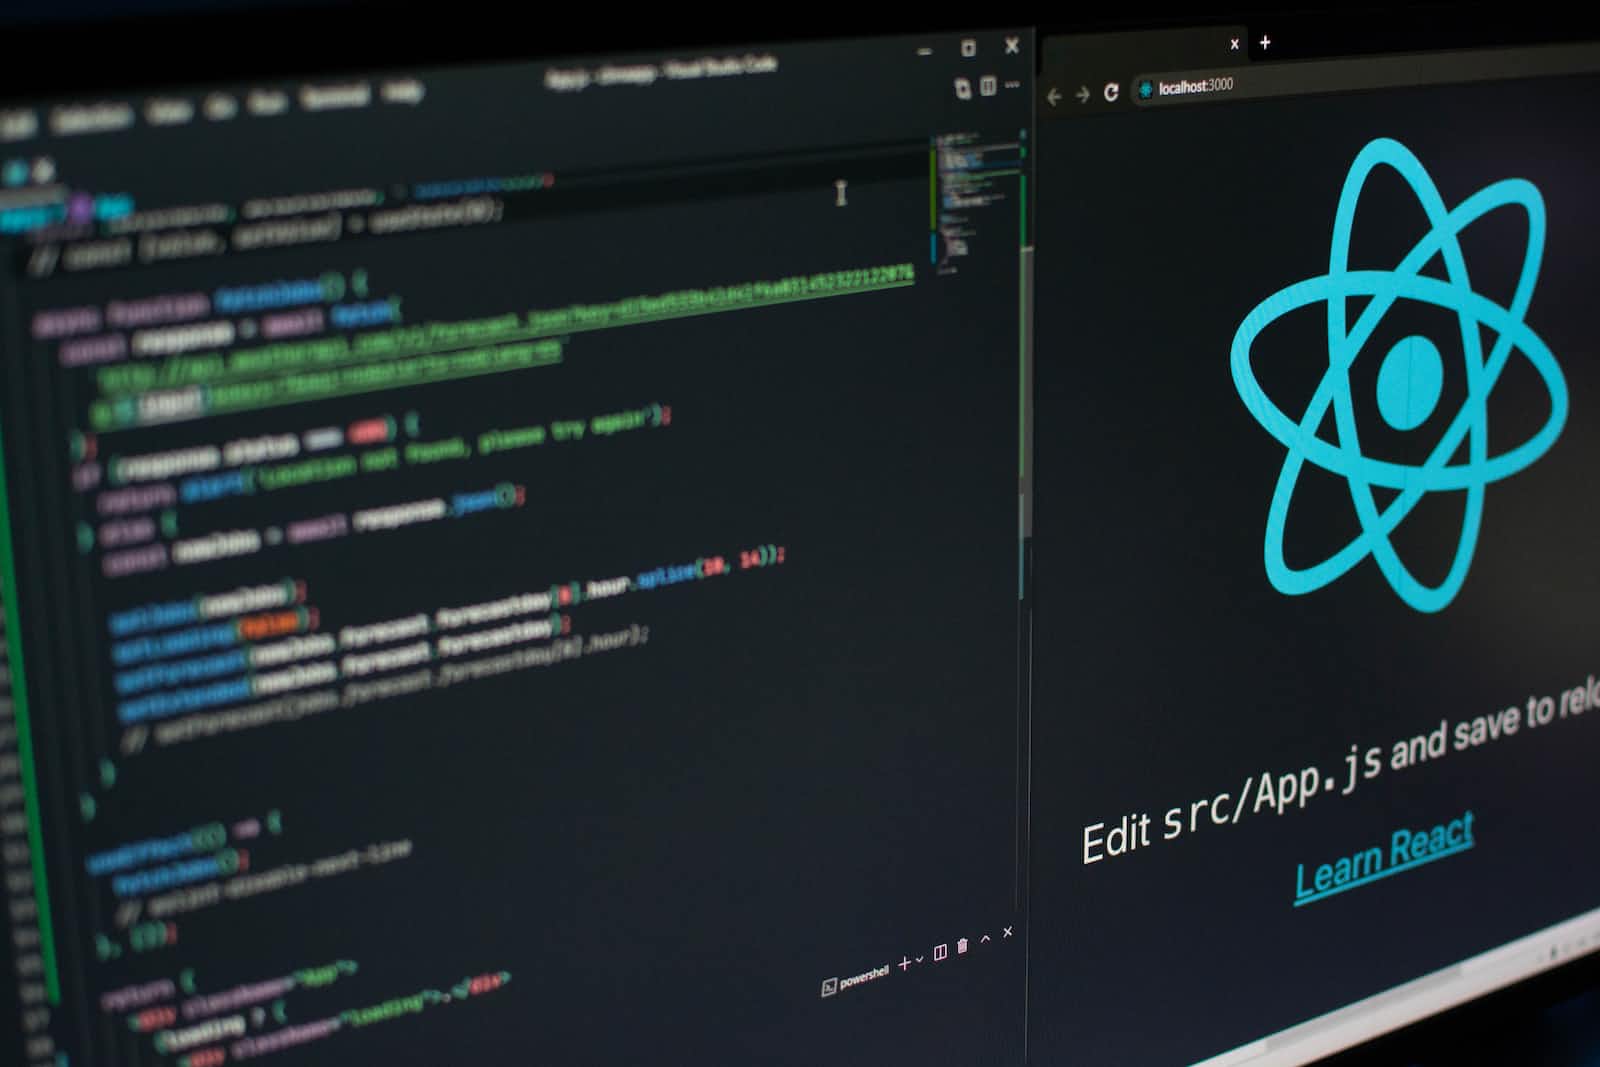 Getting started with react for beginners